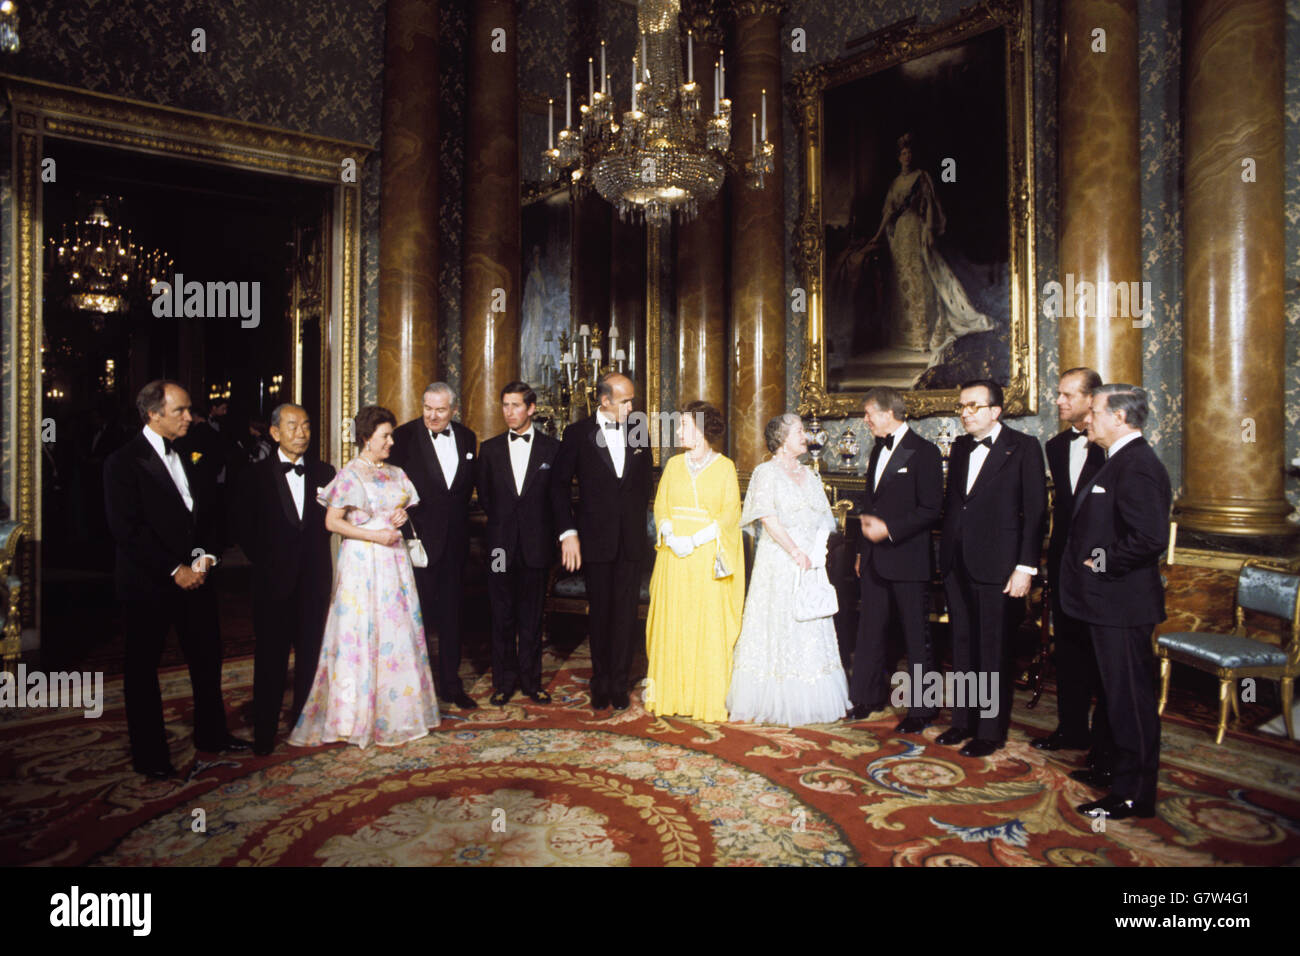 The Queen and members of the Royal Family in the Blue Drawing Room at Buckingham Palace, as they entertained seven world leaders in London for the Downing Street Summit talks. (l-r) Pierre Trudeau (Canada), Takeo Fukuda (Japan), Princess Margaret, James Callaghan, Prince Charles, Giscard d'Estaing (France), Queen Elizabeth II, the Queen Mother, President Carter (USA), Giulio Andreotti (Italy), Prince Philip and Helmut Schmidt (West Germany.) Stock Photo